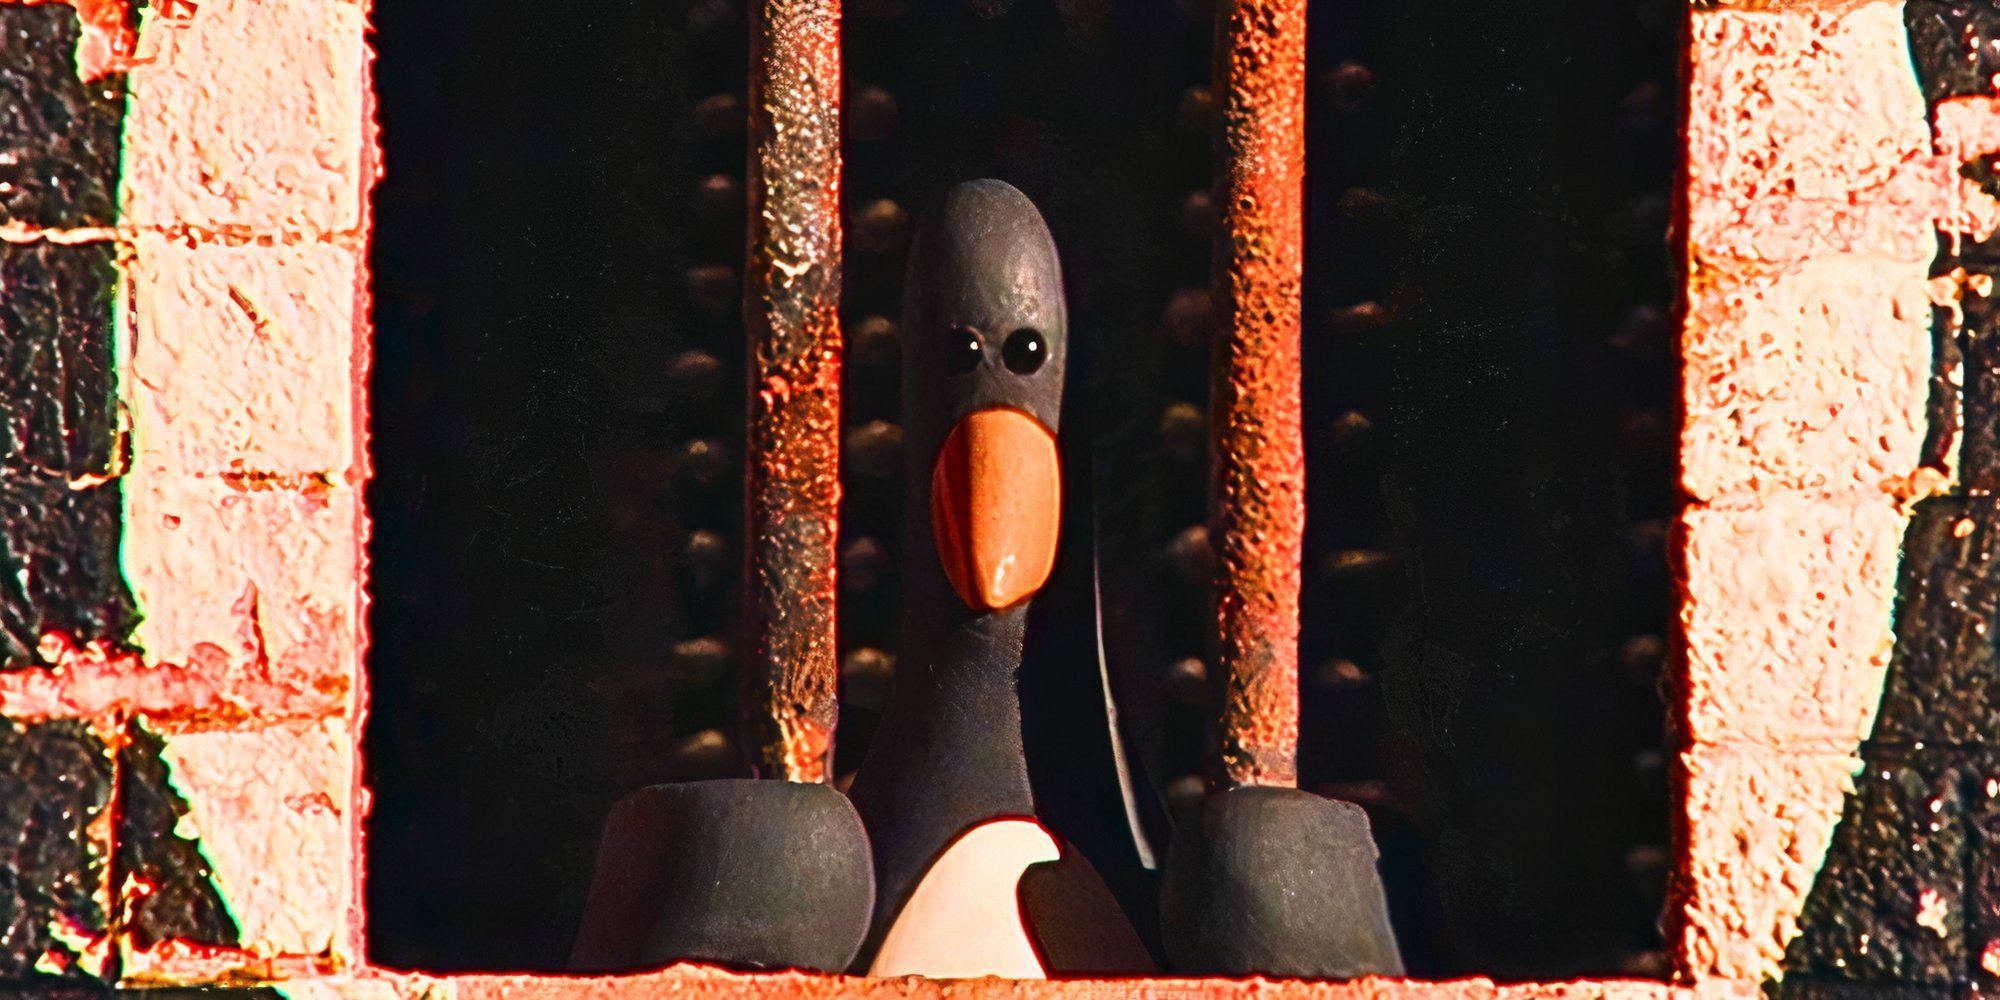 Feathers McGraw in prison in Wallace & Gromit: The Wrong Trousers